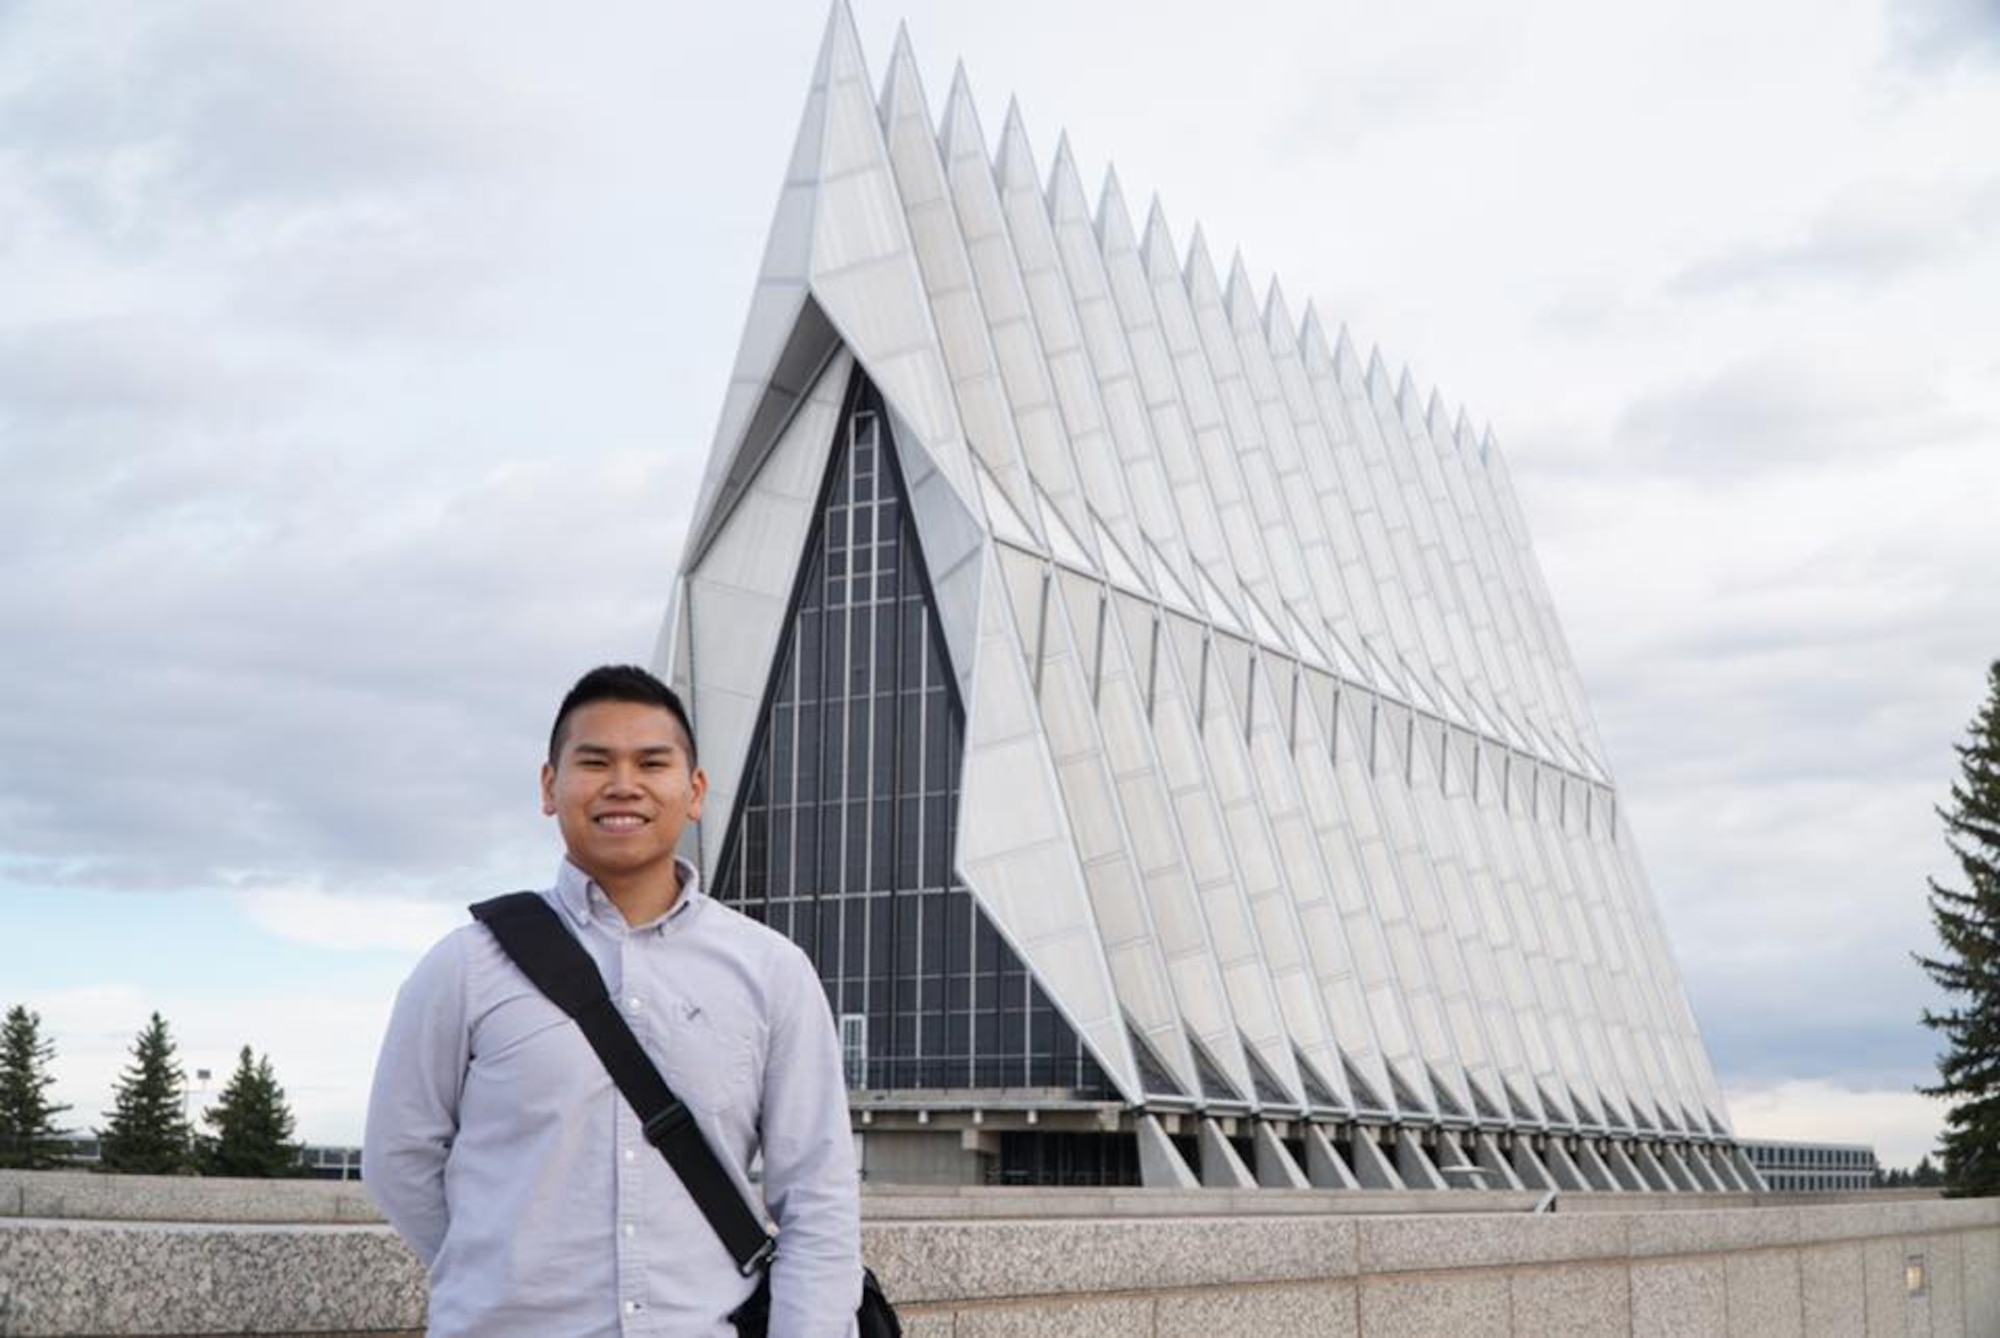 U.S. Air Force Senior Airman Patryk Myko Dela Cruz, a 35th Logistics Readiness Squadron mission generation vehicle equipment maintenance technician, stands in front of the U.S. Air Force Academy at Colorado Springs, Colorado, April, 2016. Dela Cruz did not make it the first time he applied, but with perseverance he did not give up and worked hard toward his goal until it was finally achieved. On March 8, 2017, he received his acceptance letter from his LEAD program counselor. (Courtesy Photo)